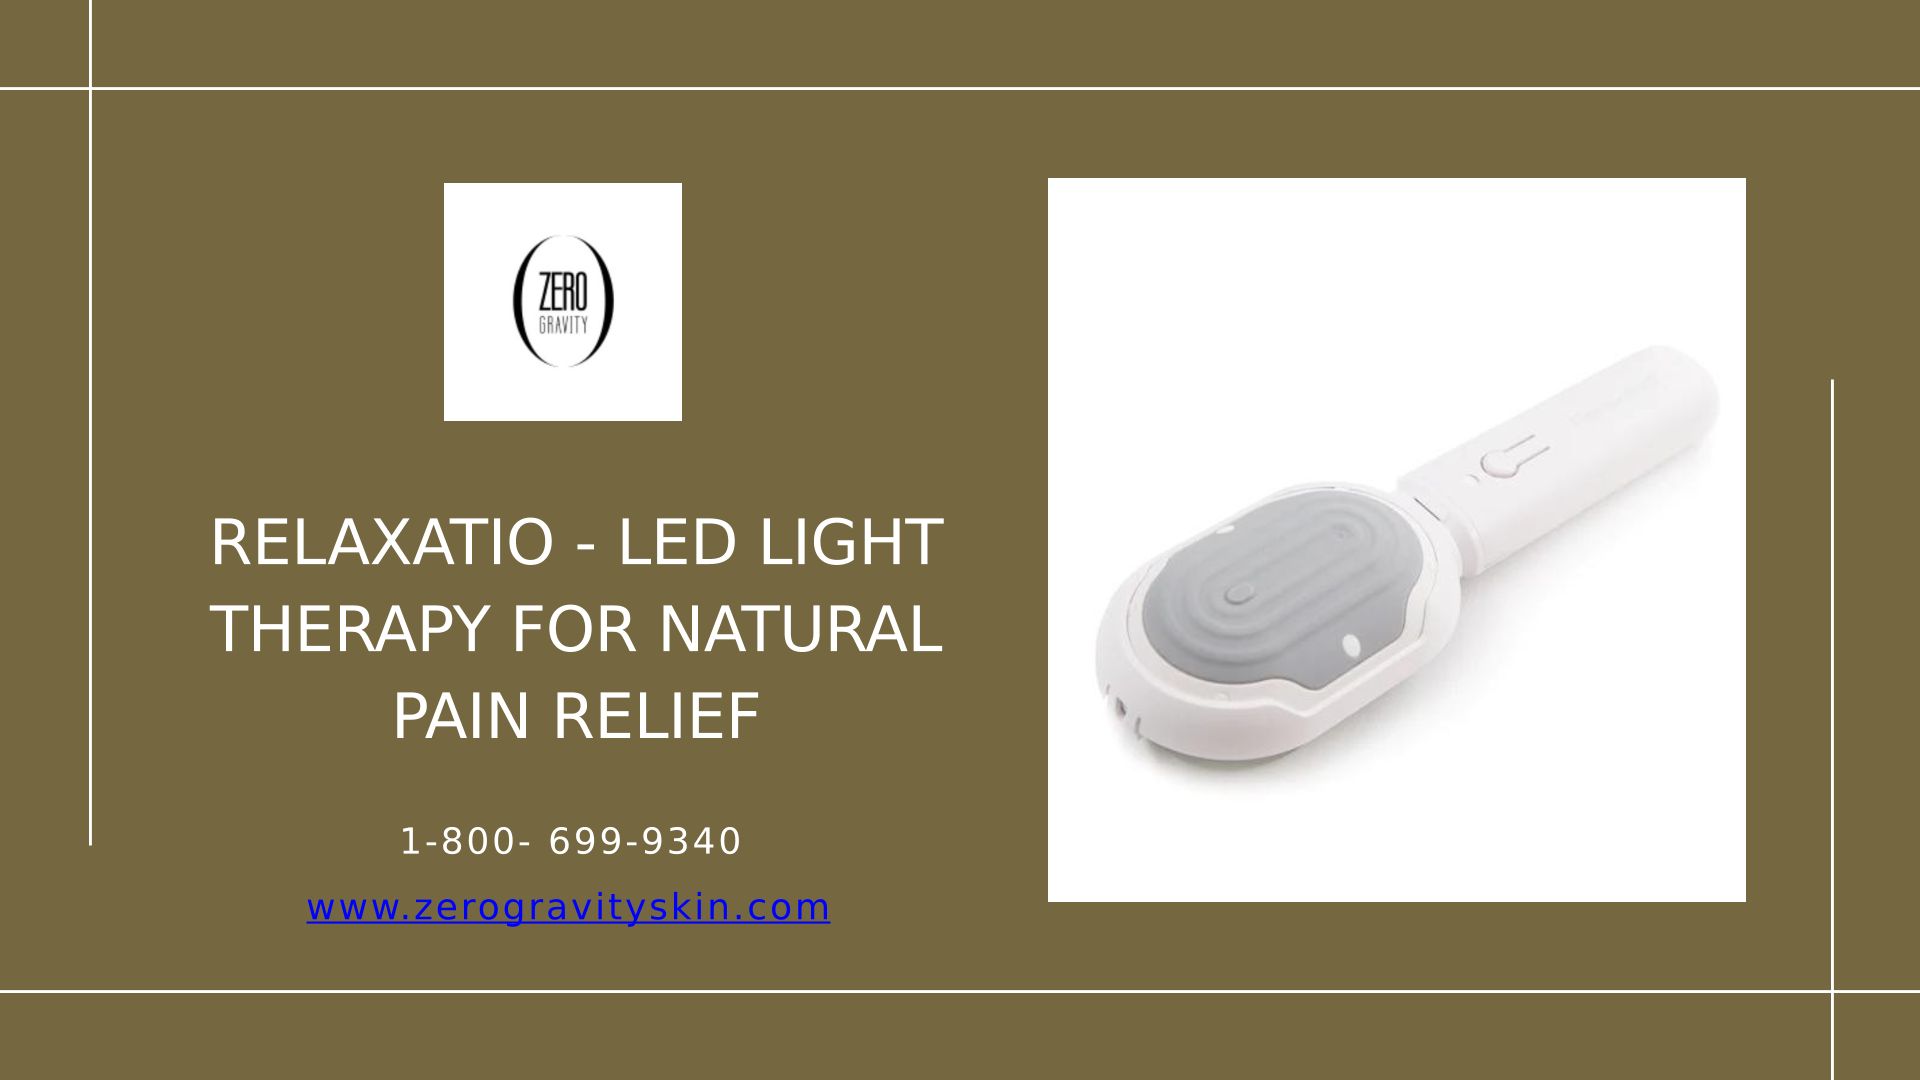 Relaxatio - LED Light Therapy For Natural Pain Relief